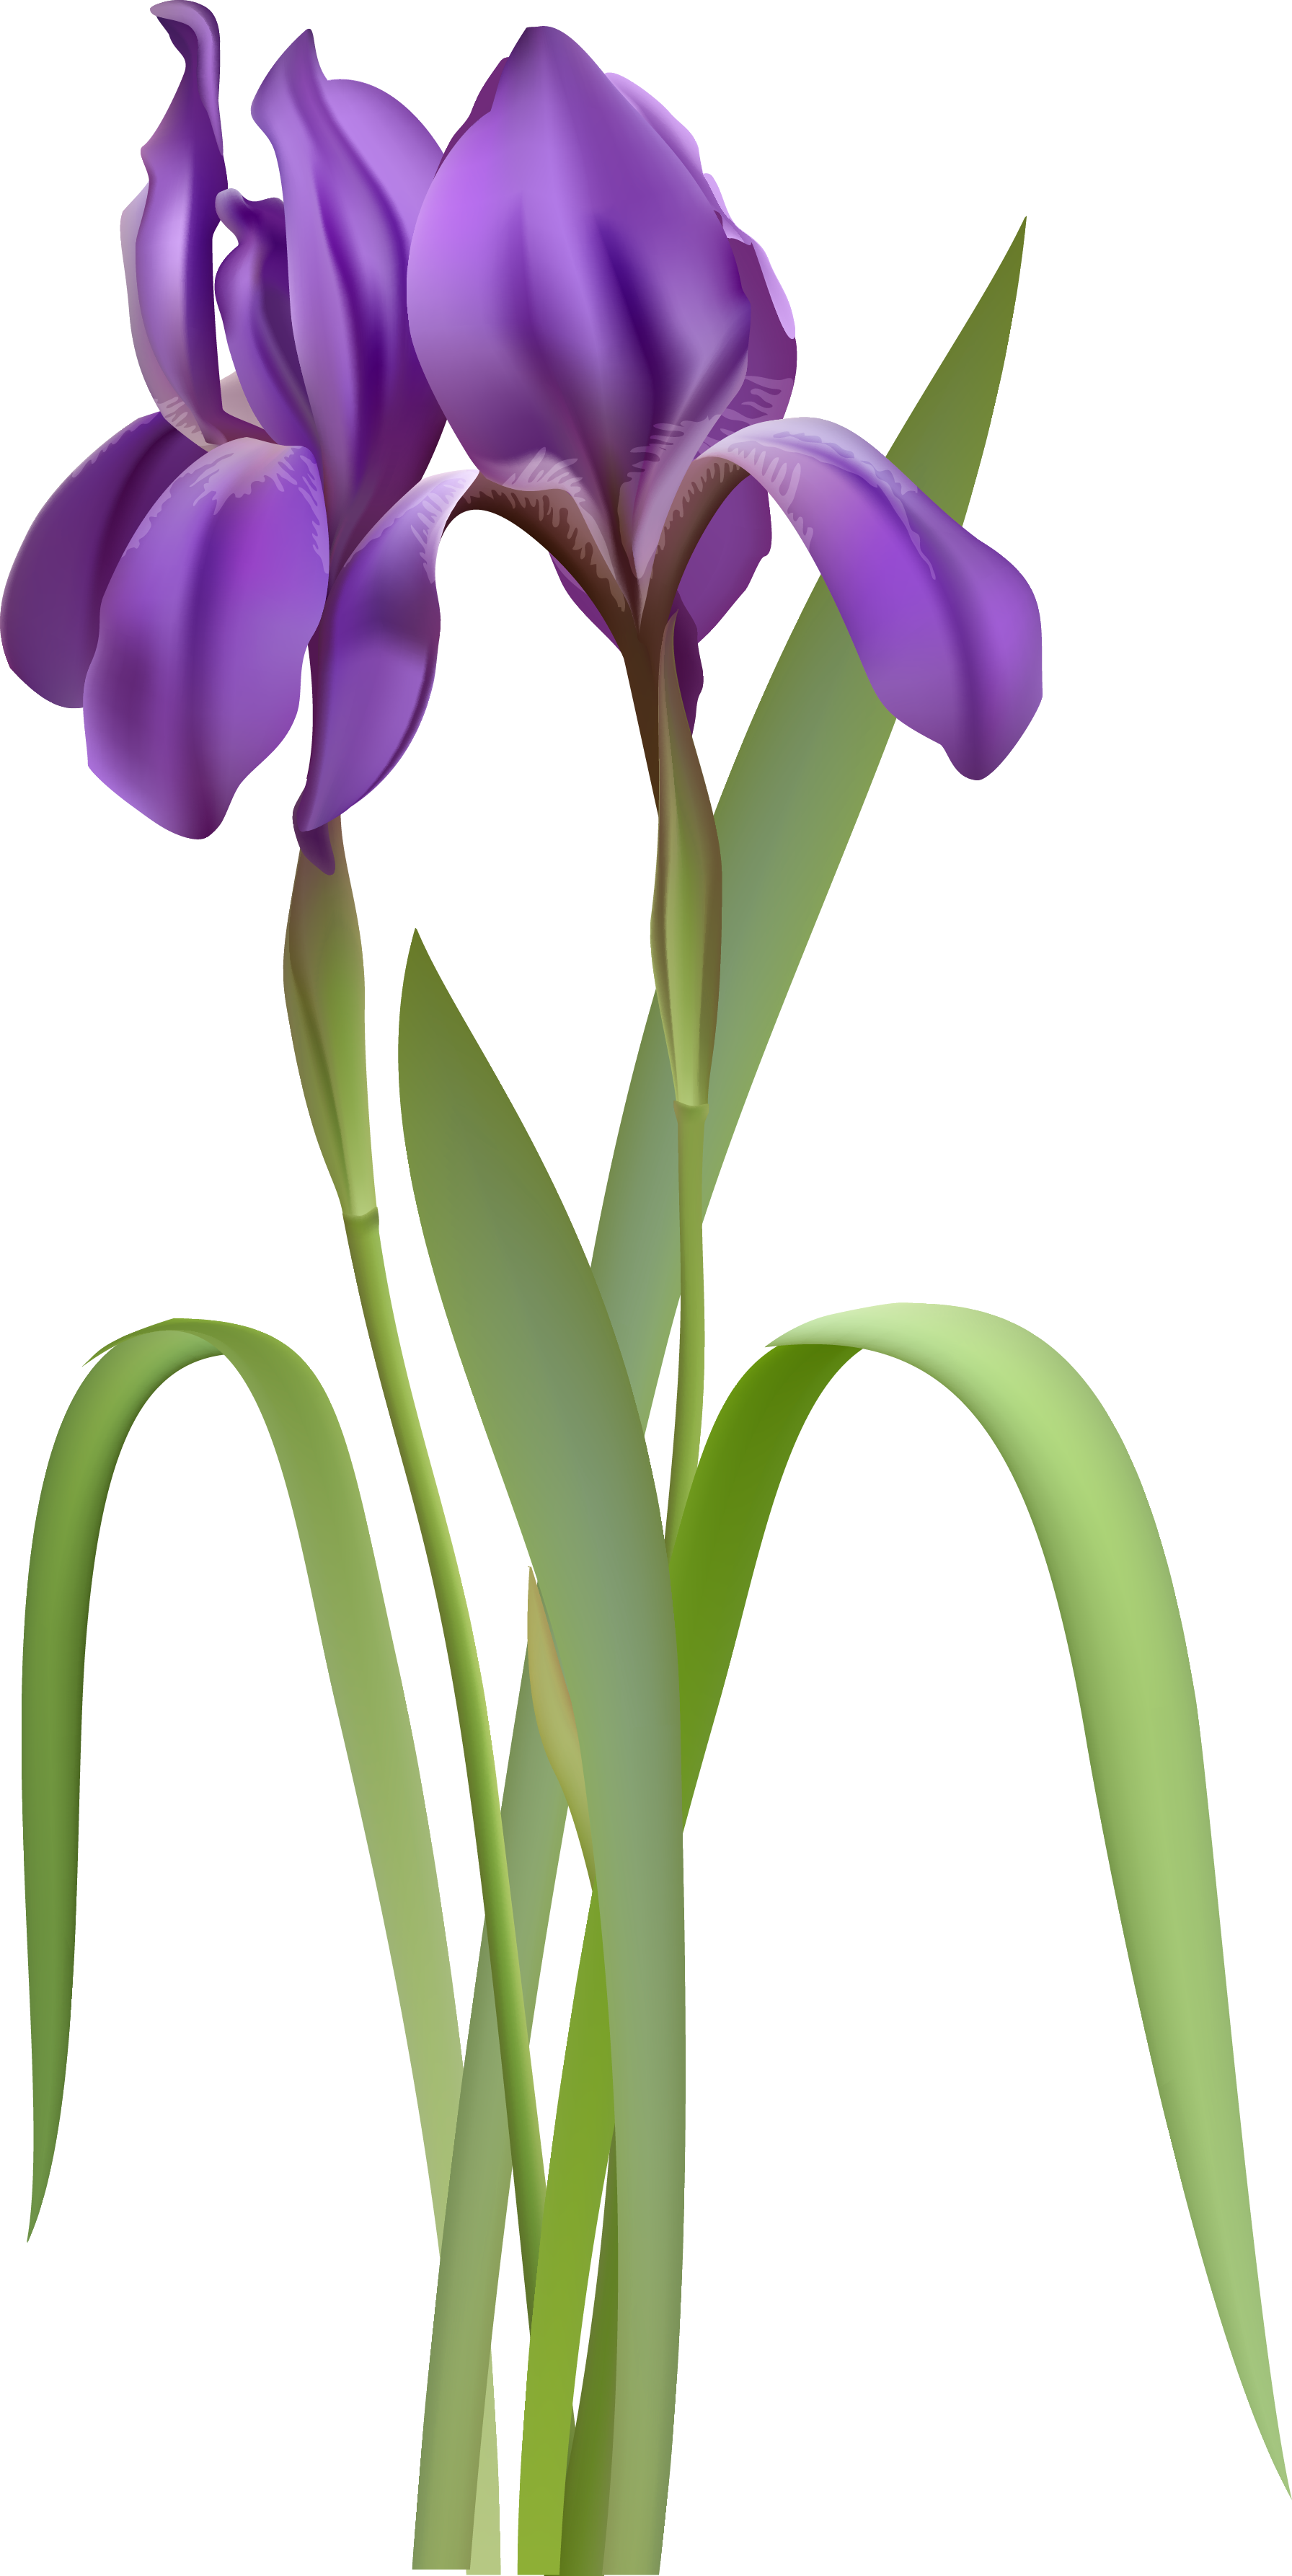 Iris Spring Flower PNG Clipart | Gallery Yopriceville ...